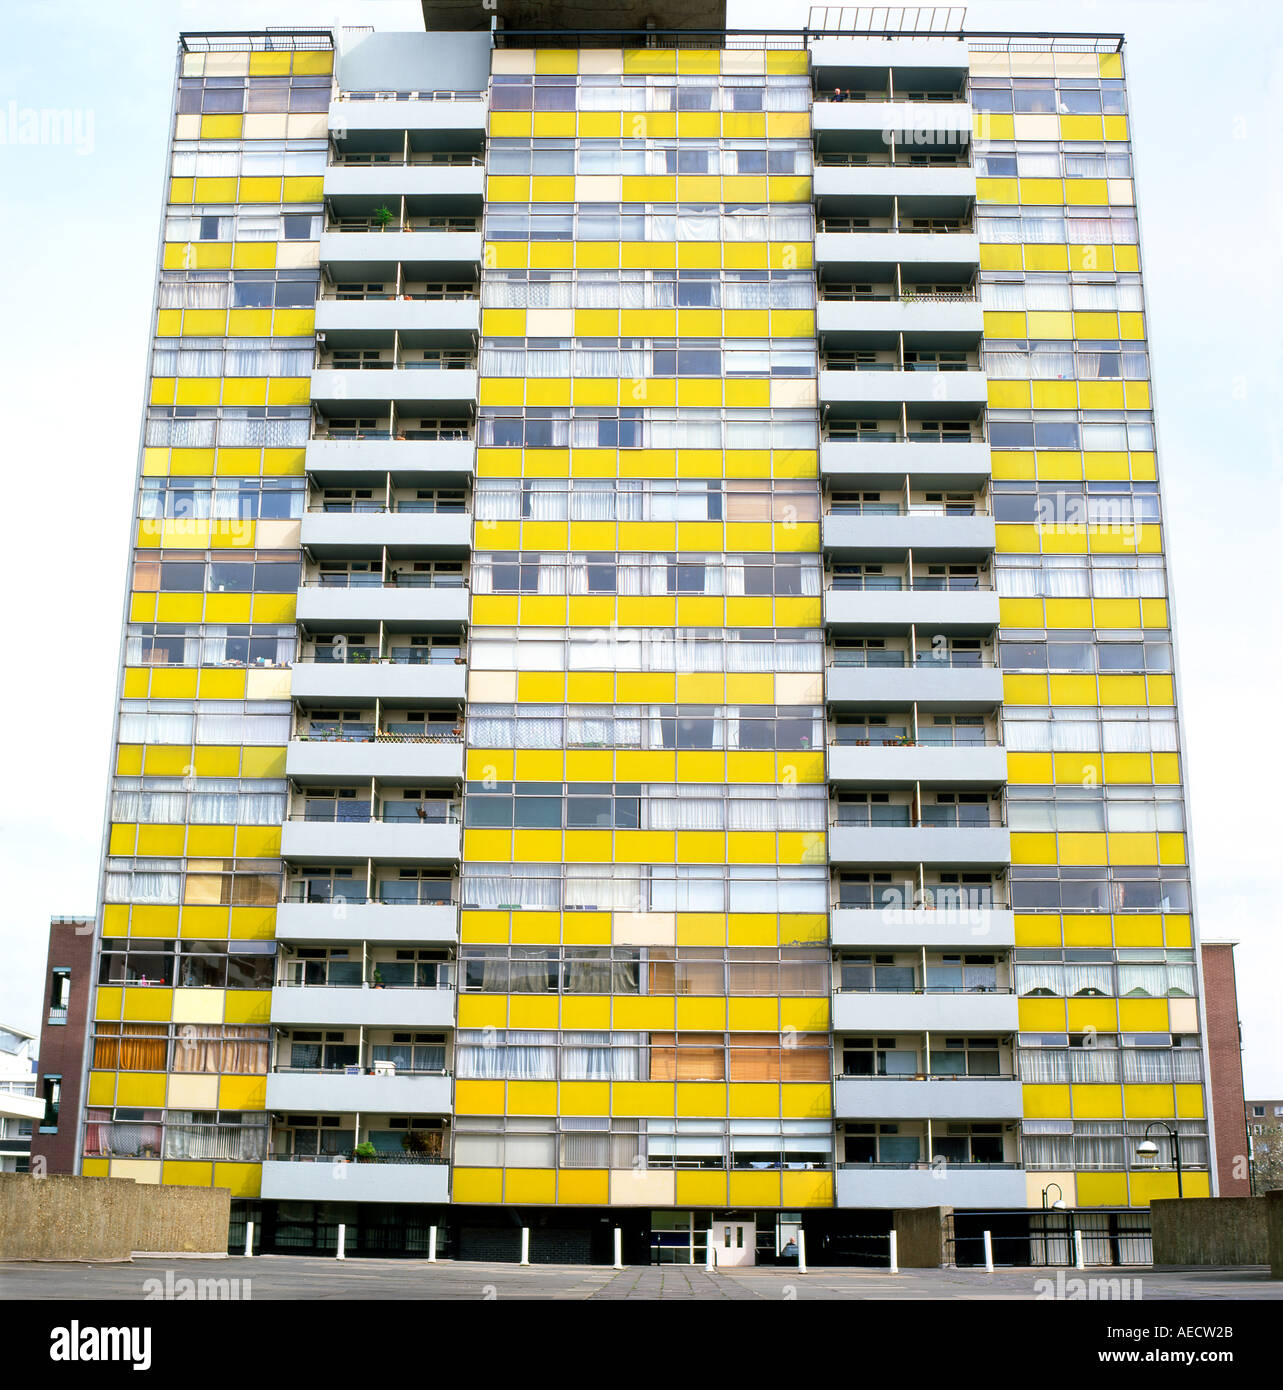 Exterior view of Great Arthur House apartment building on the Golden Lane Estate before restoration to the facade City of London EC1 UK  KATHY DEWITT Stock Photo